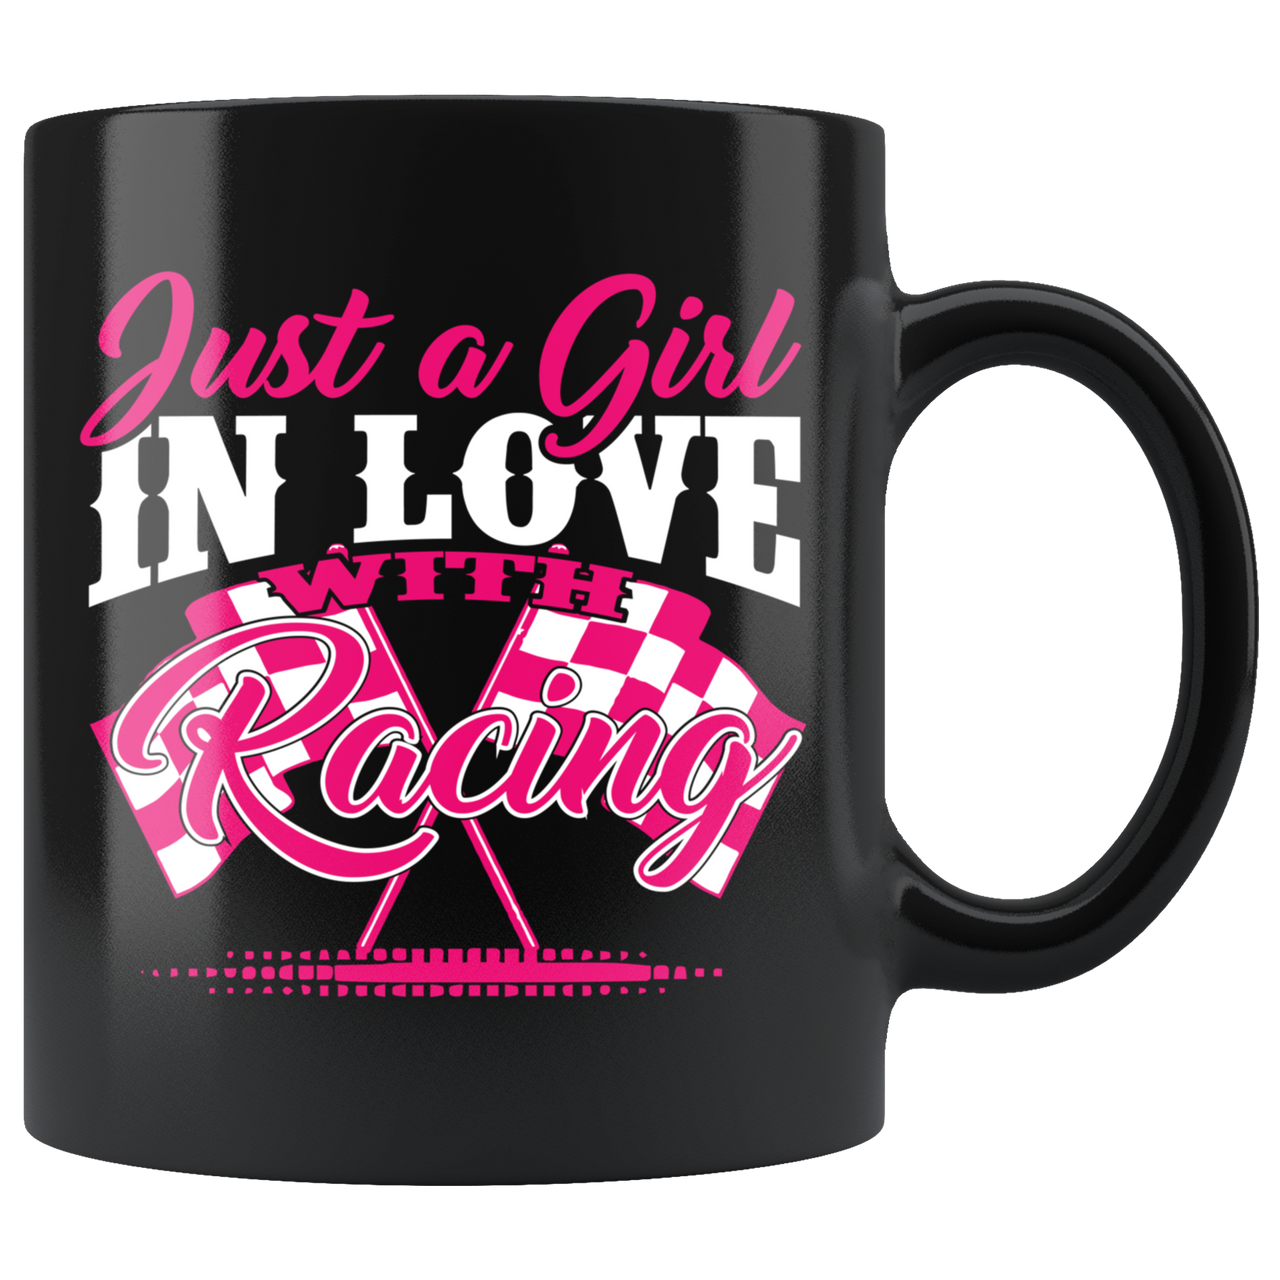 Just A Girl In Love With Racing Mug!